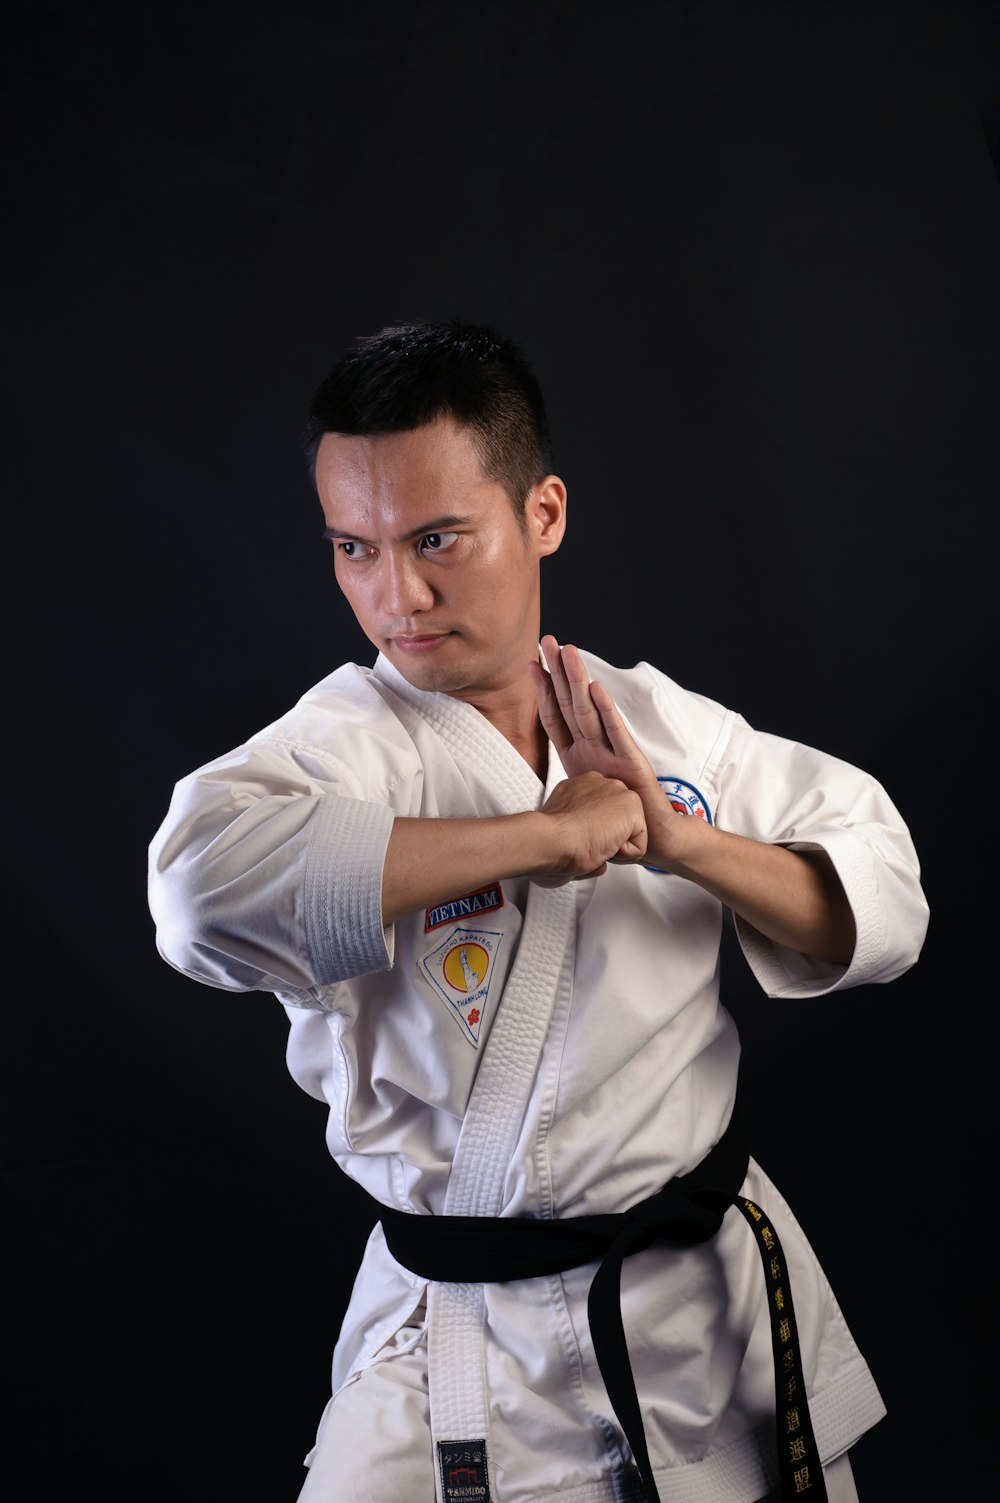 man in karate gi outfit